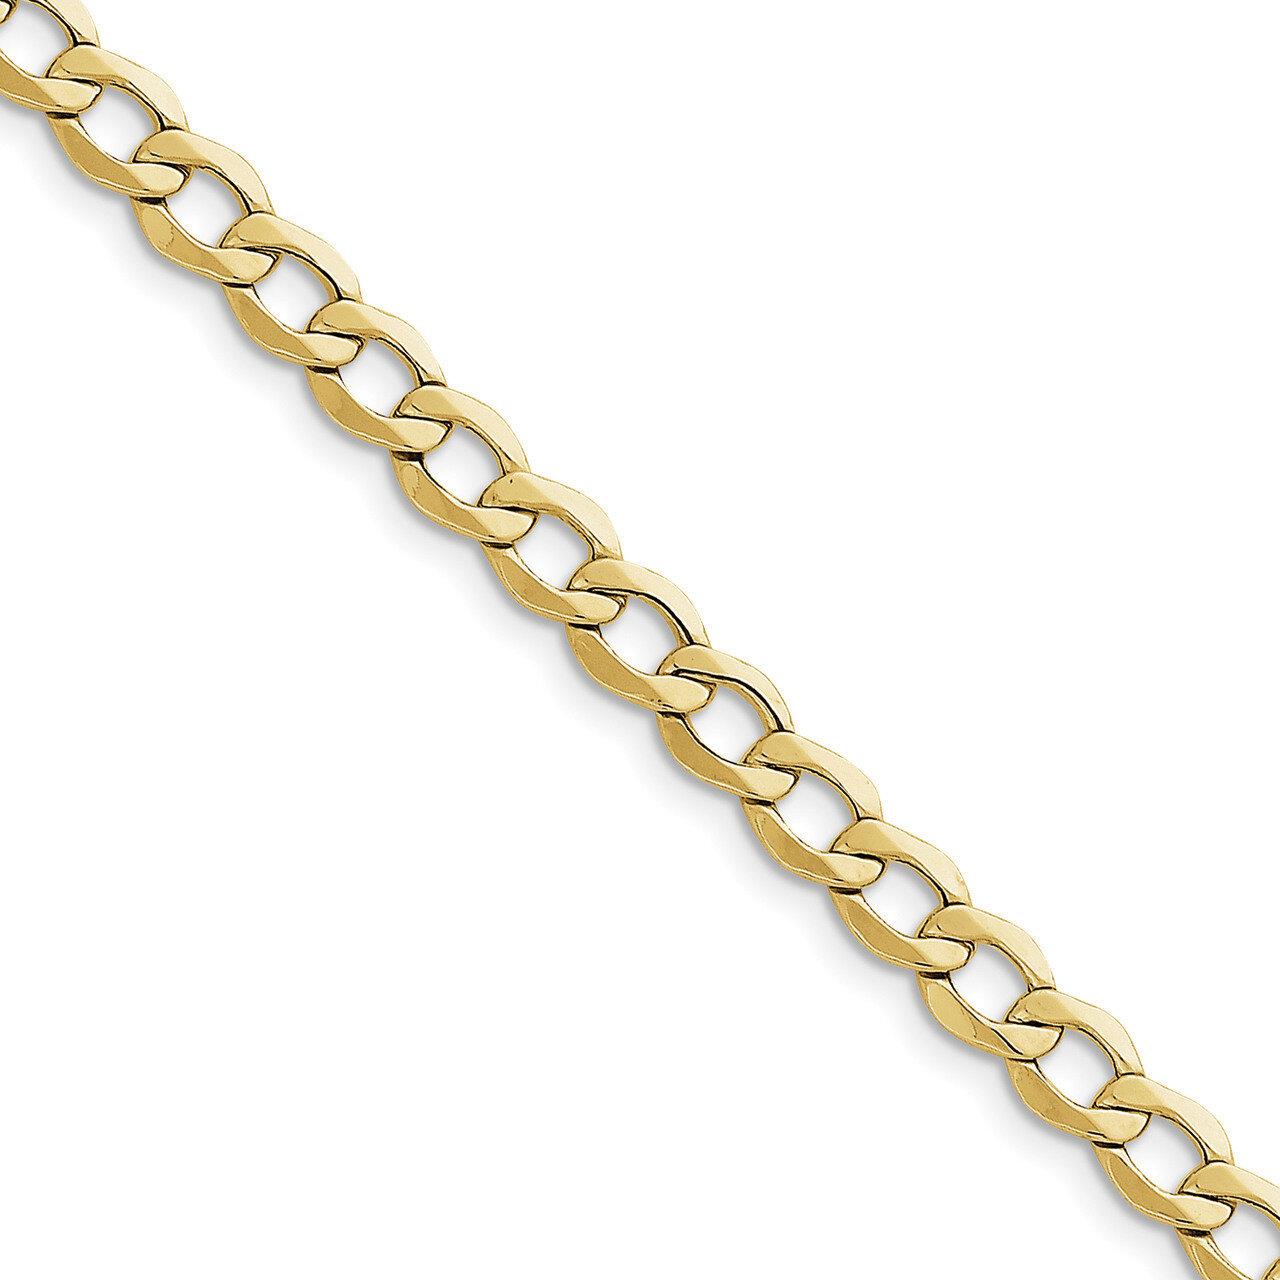 8 Inch 7.0mm Semi-Solid Curb Link Chain 10k Gold 10BC110-8